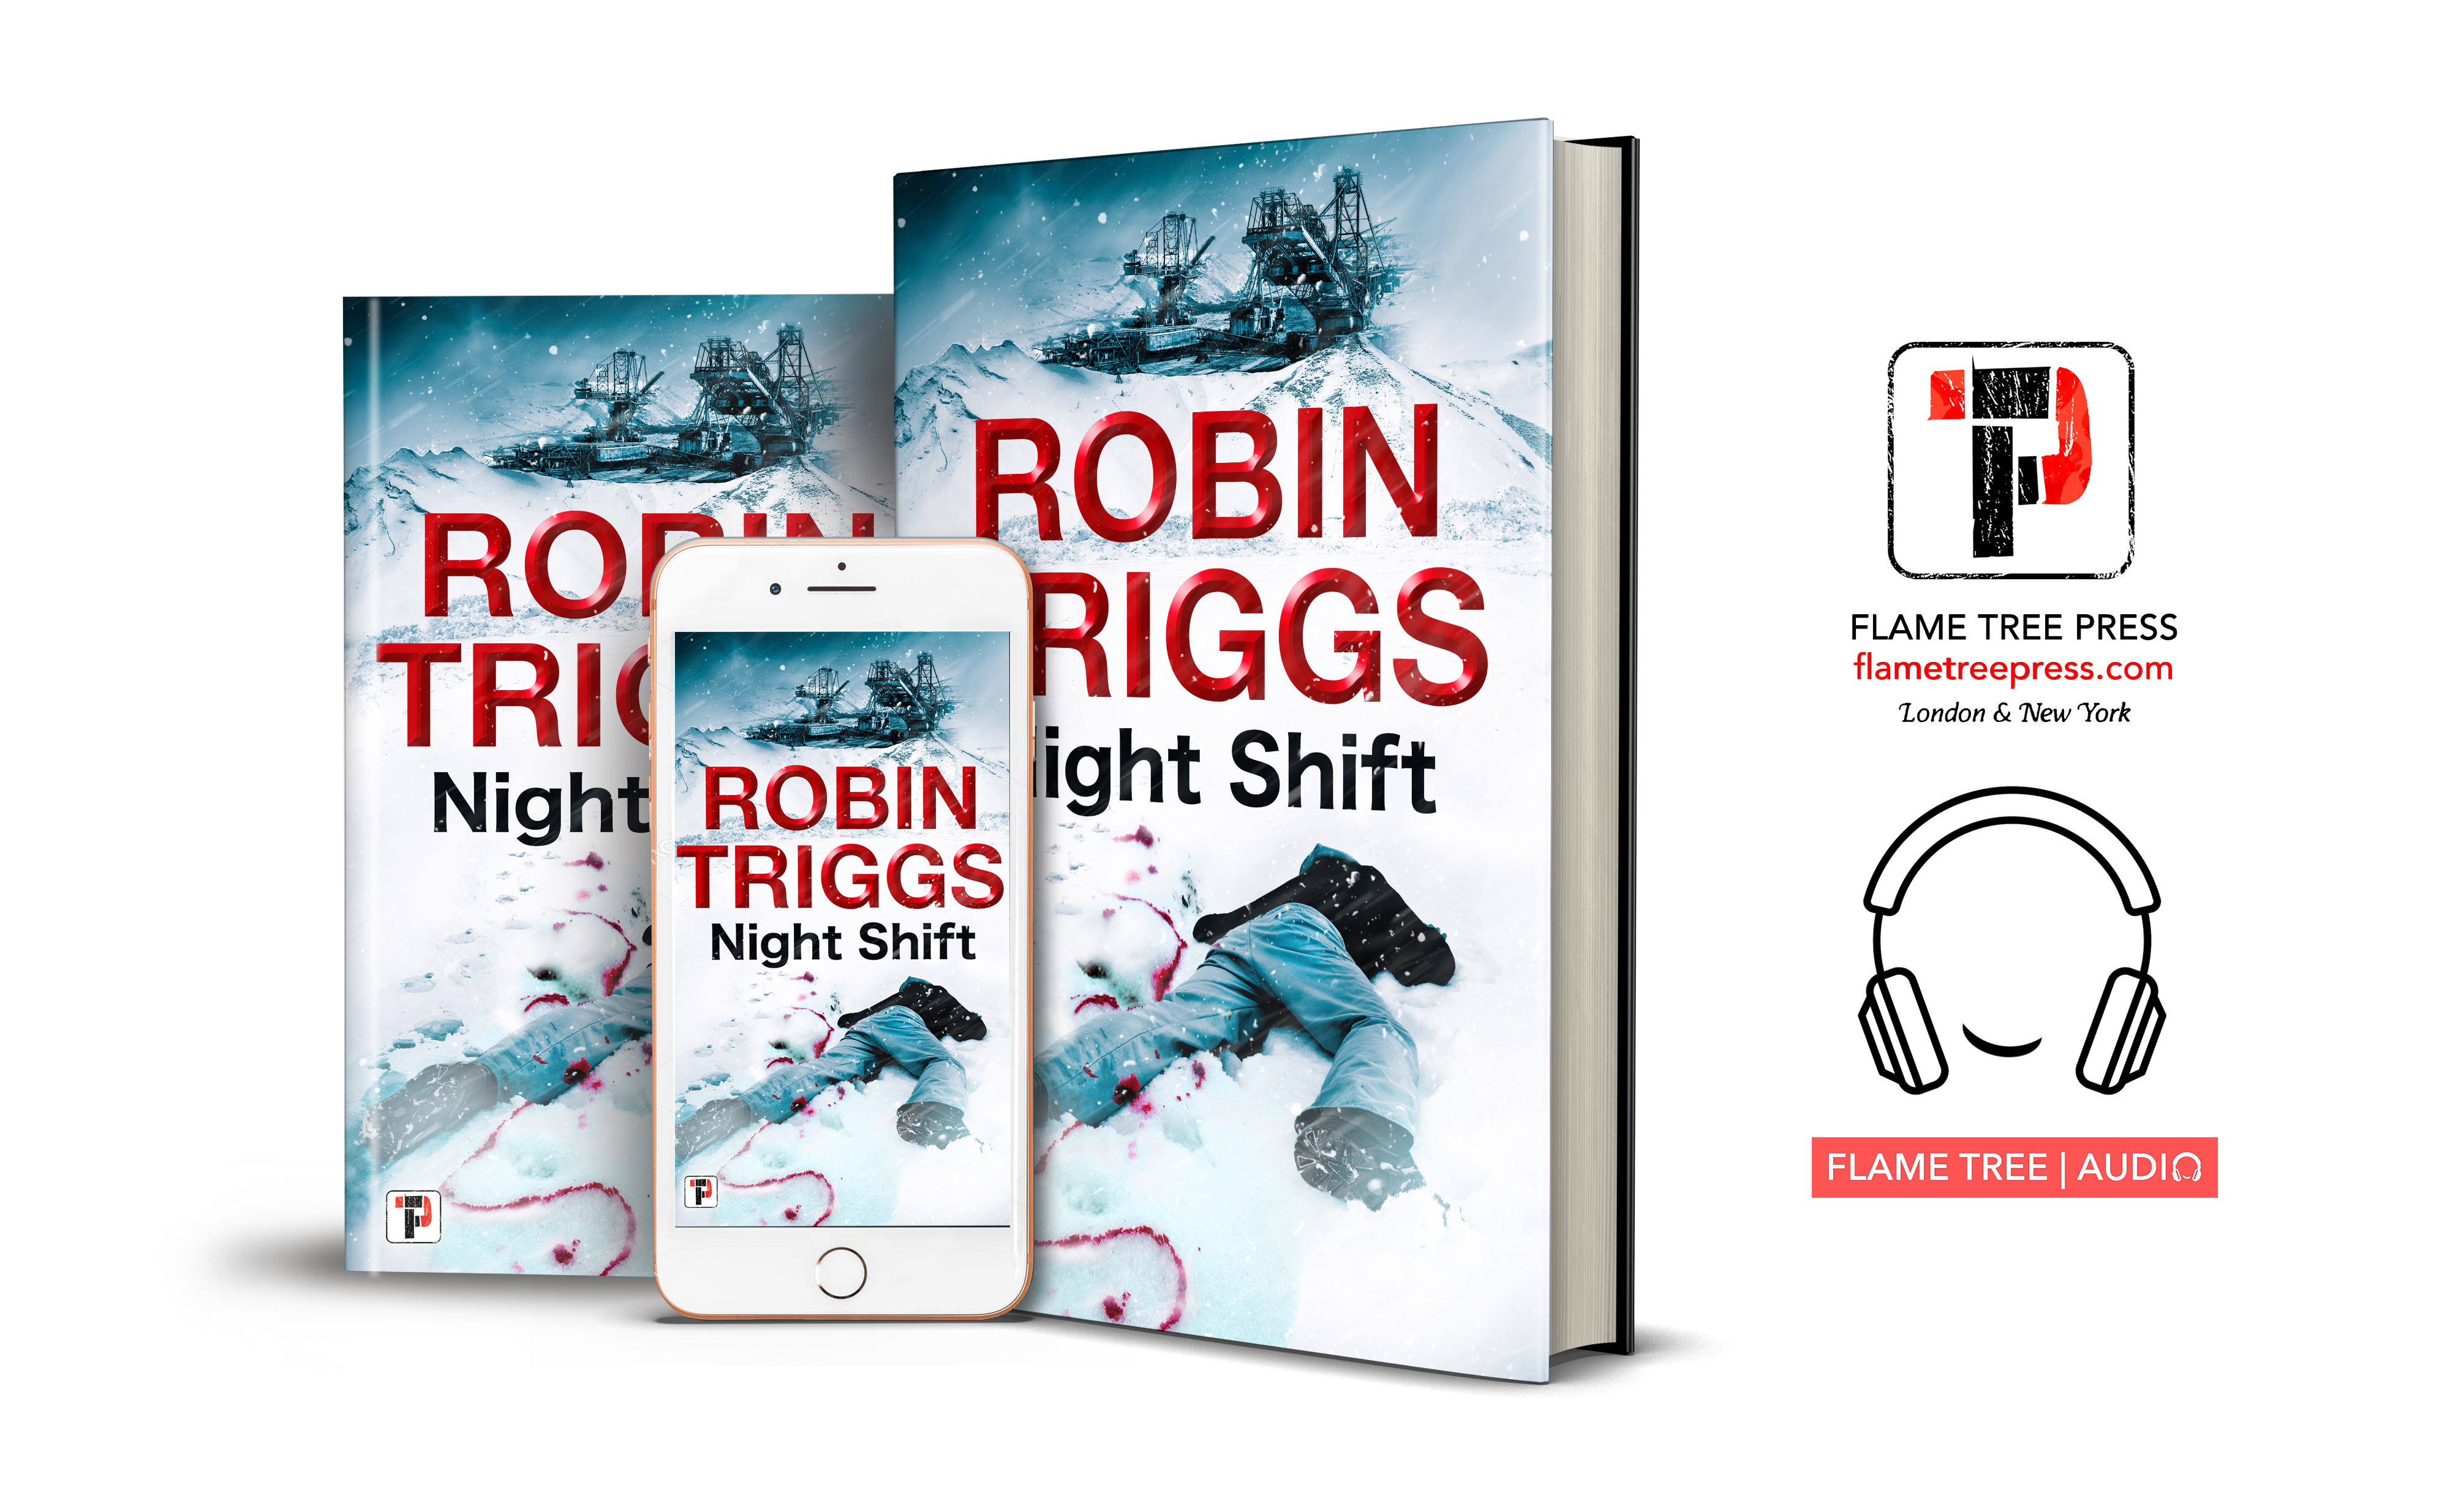 Robin Triggs' outstanding debut